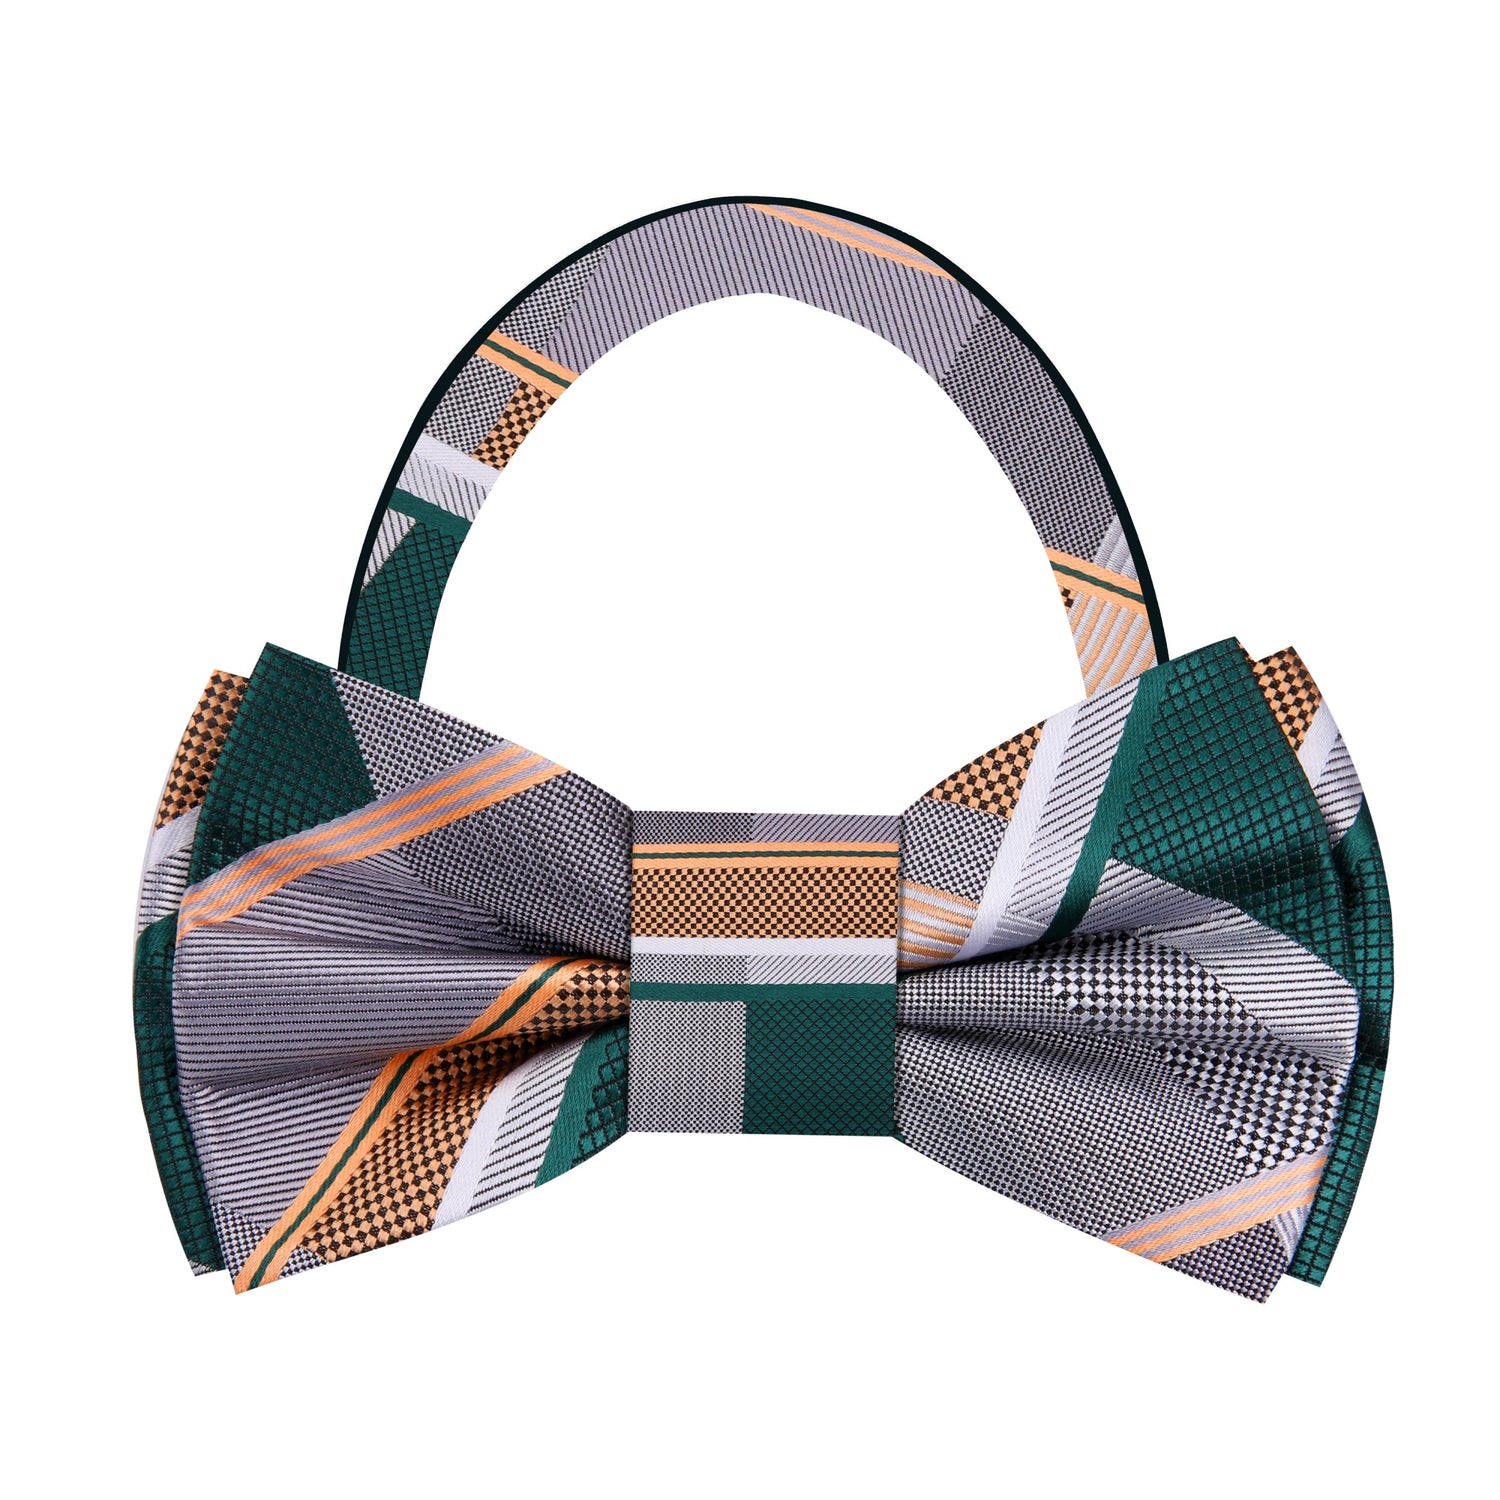 Pre-Tied View: Grey, Green, Gold, White Plaid Bow Tie